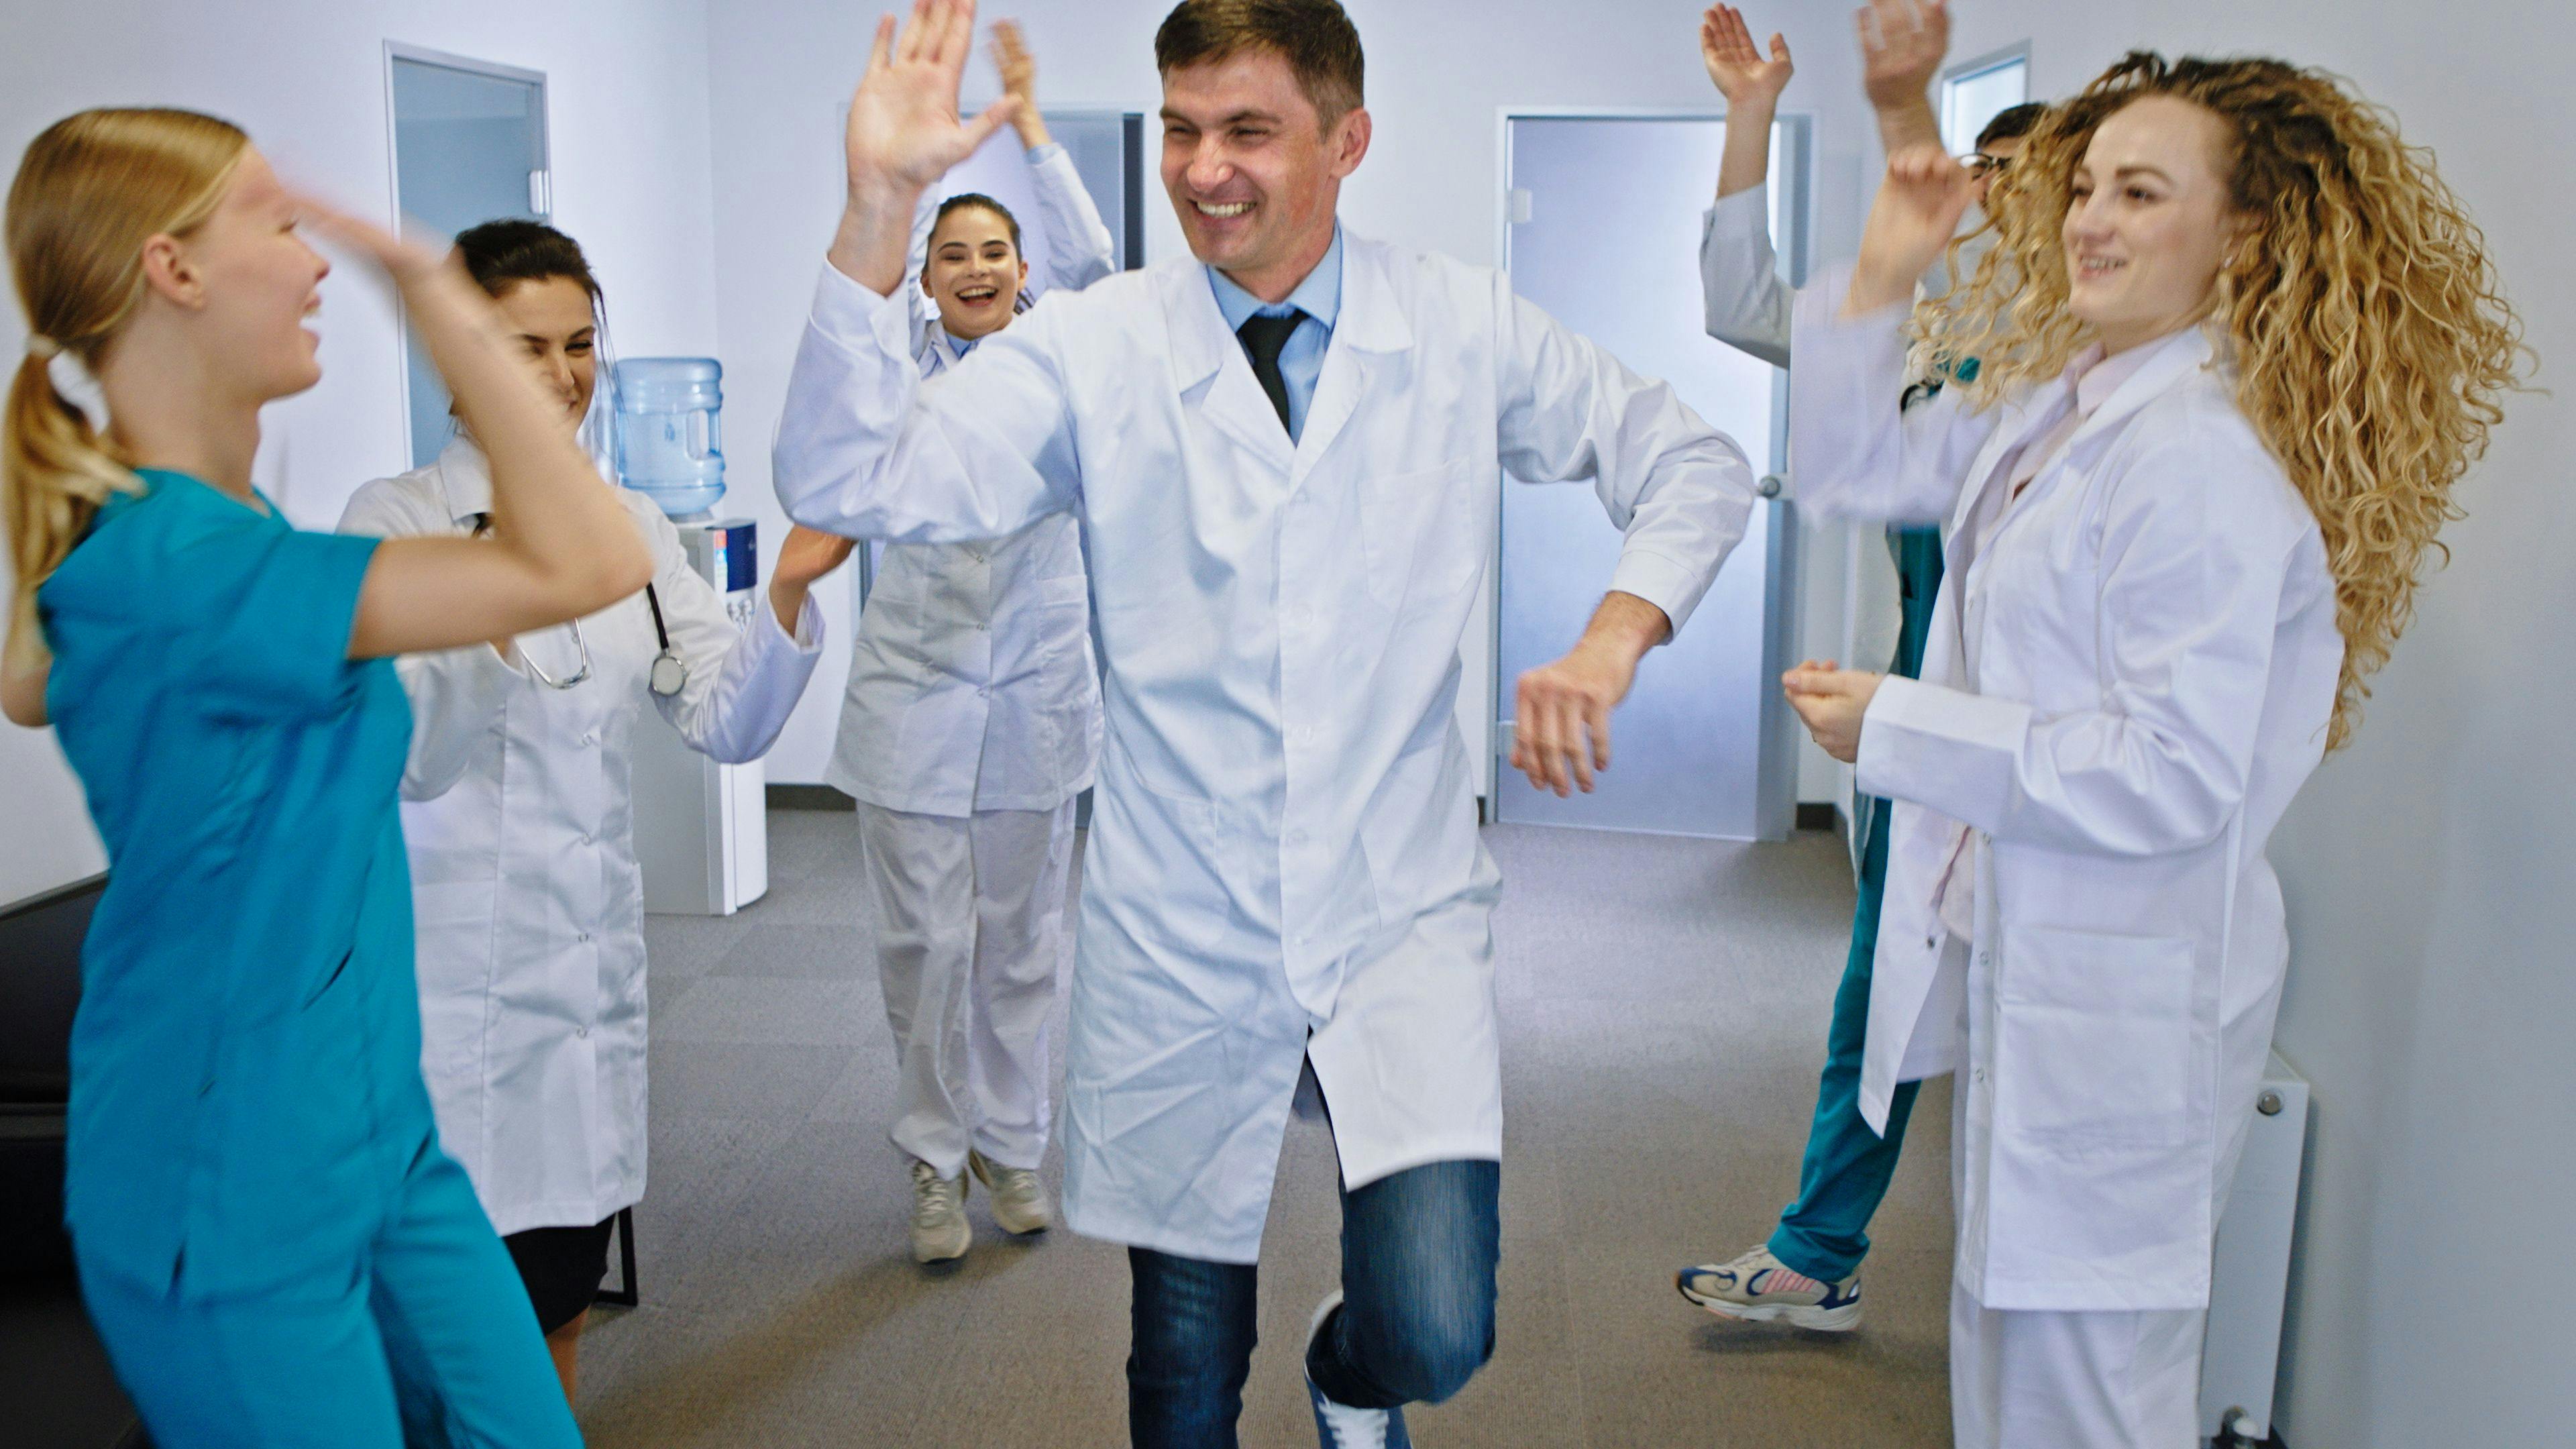 fun doctor | © spoialabrothers - stock.adobe.com